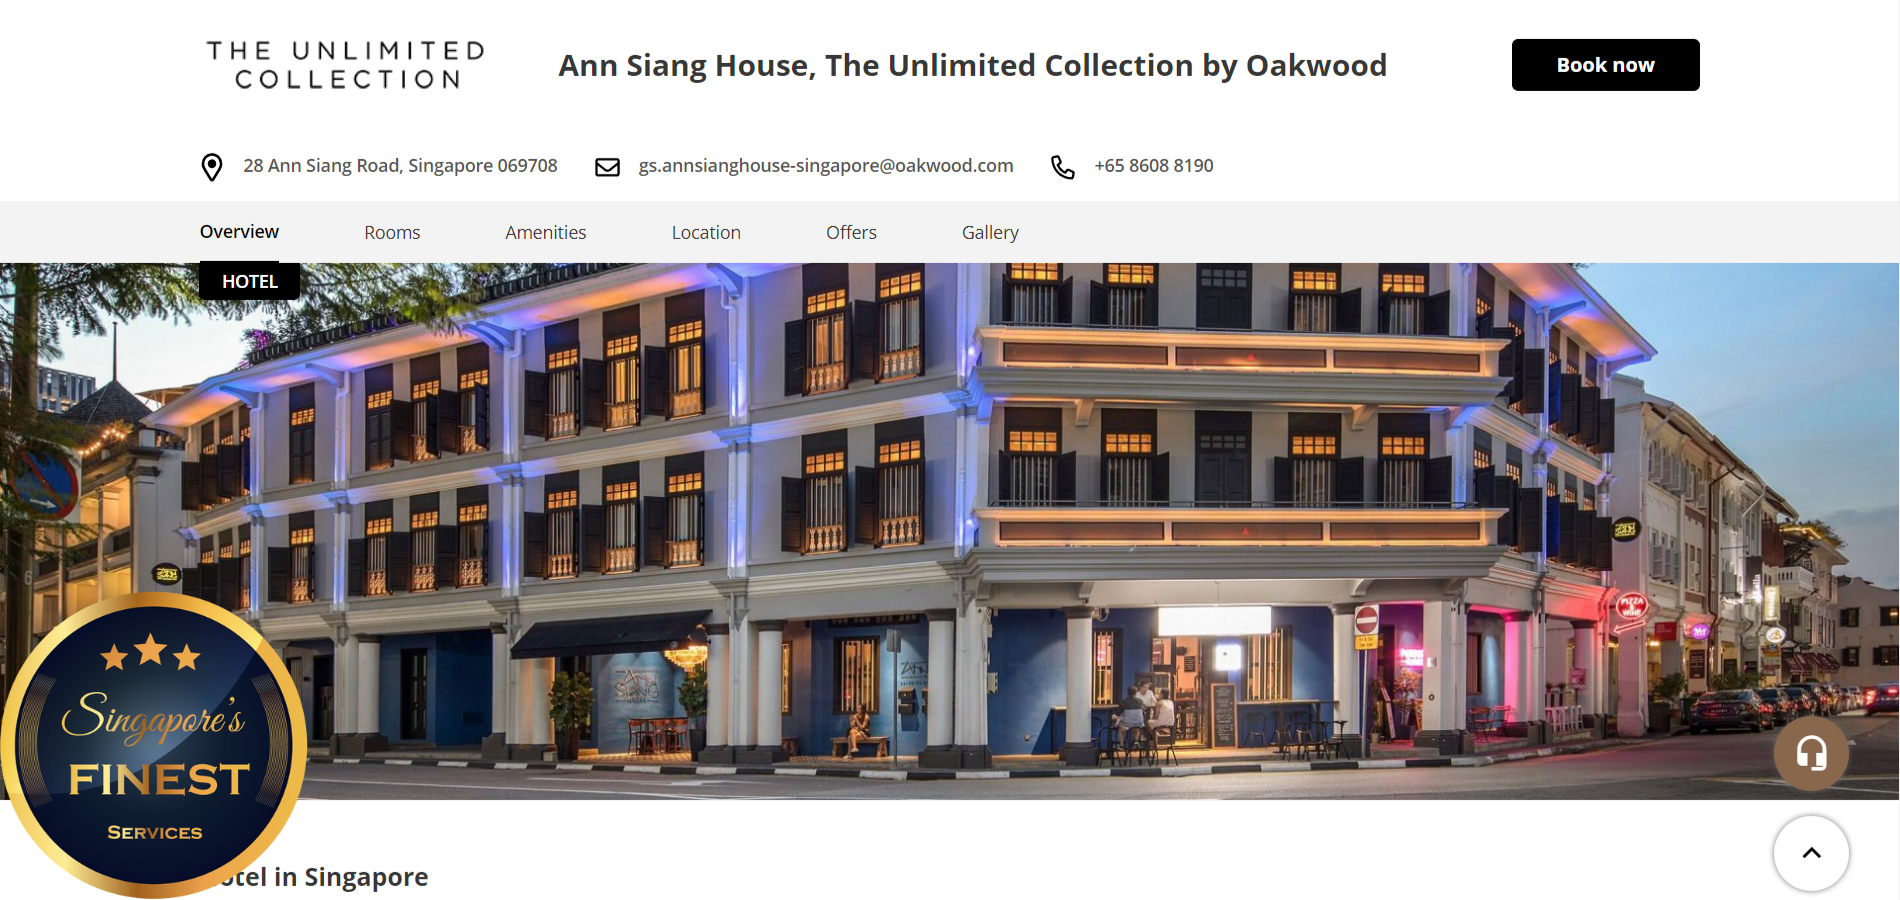 The Finest Hotels in Chinatown Singapore